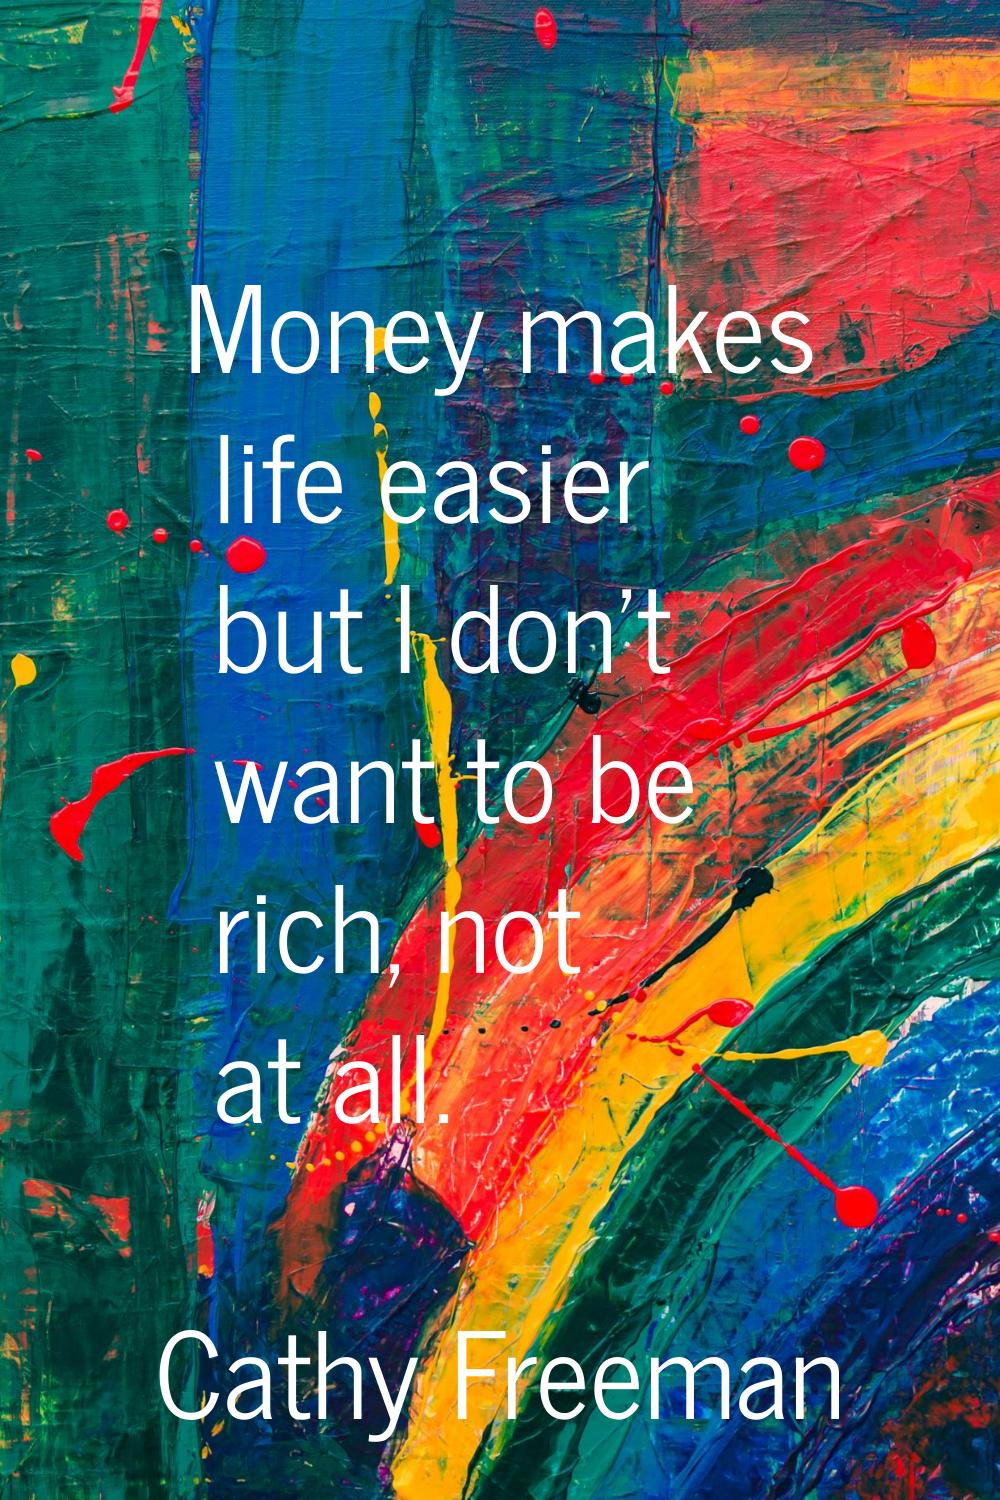 Money makes life easier but I don't want to be rich, not at all.